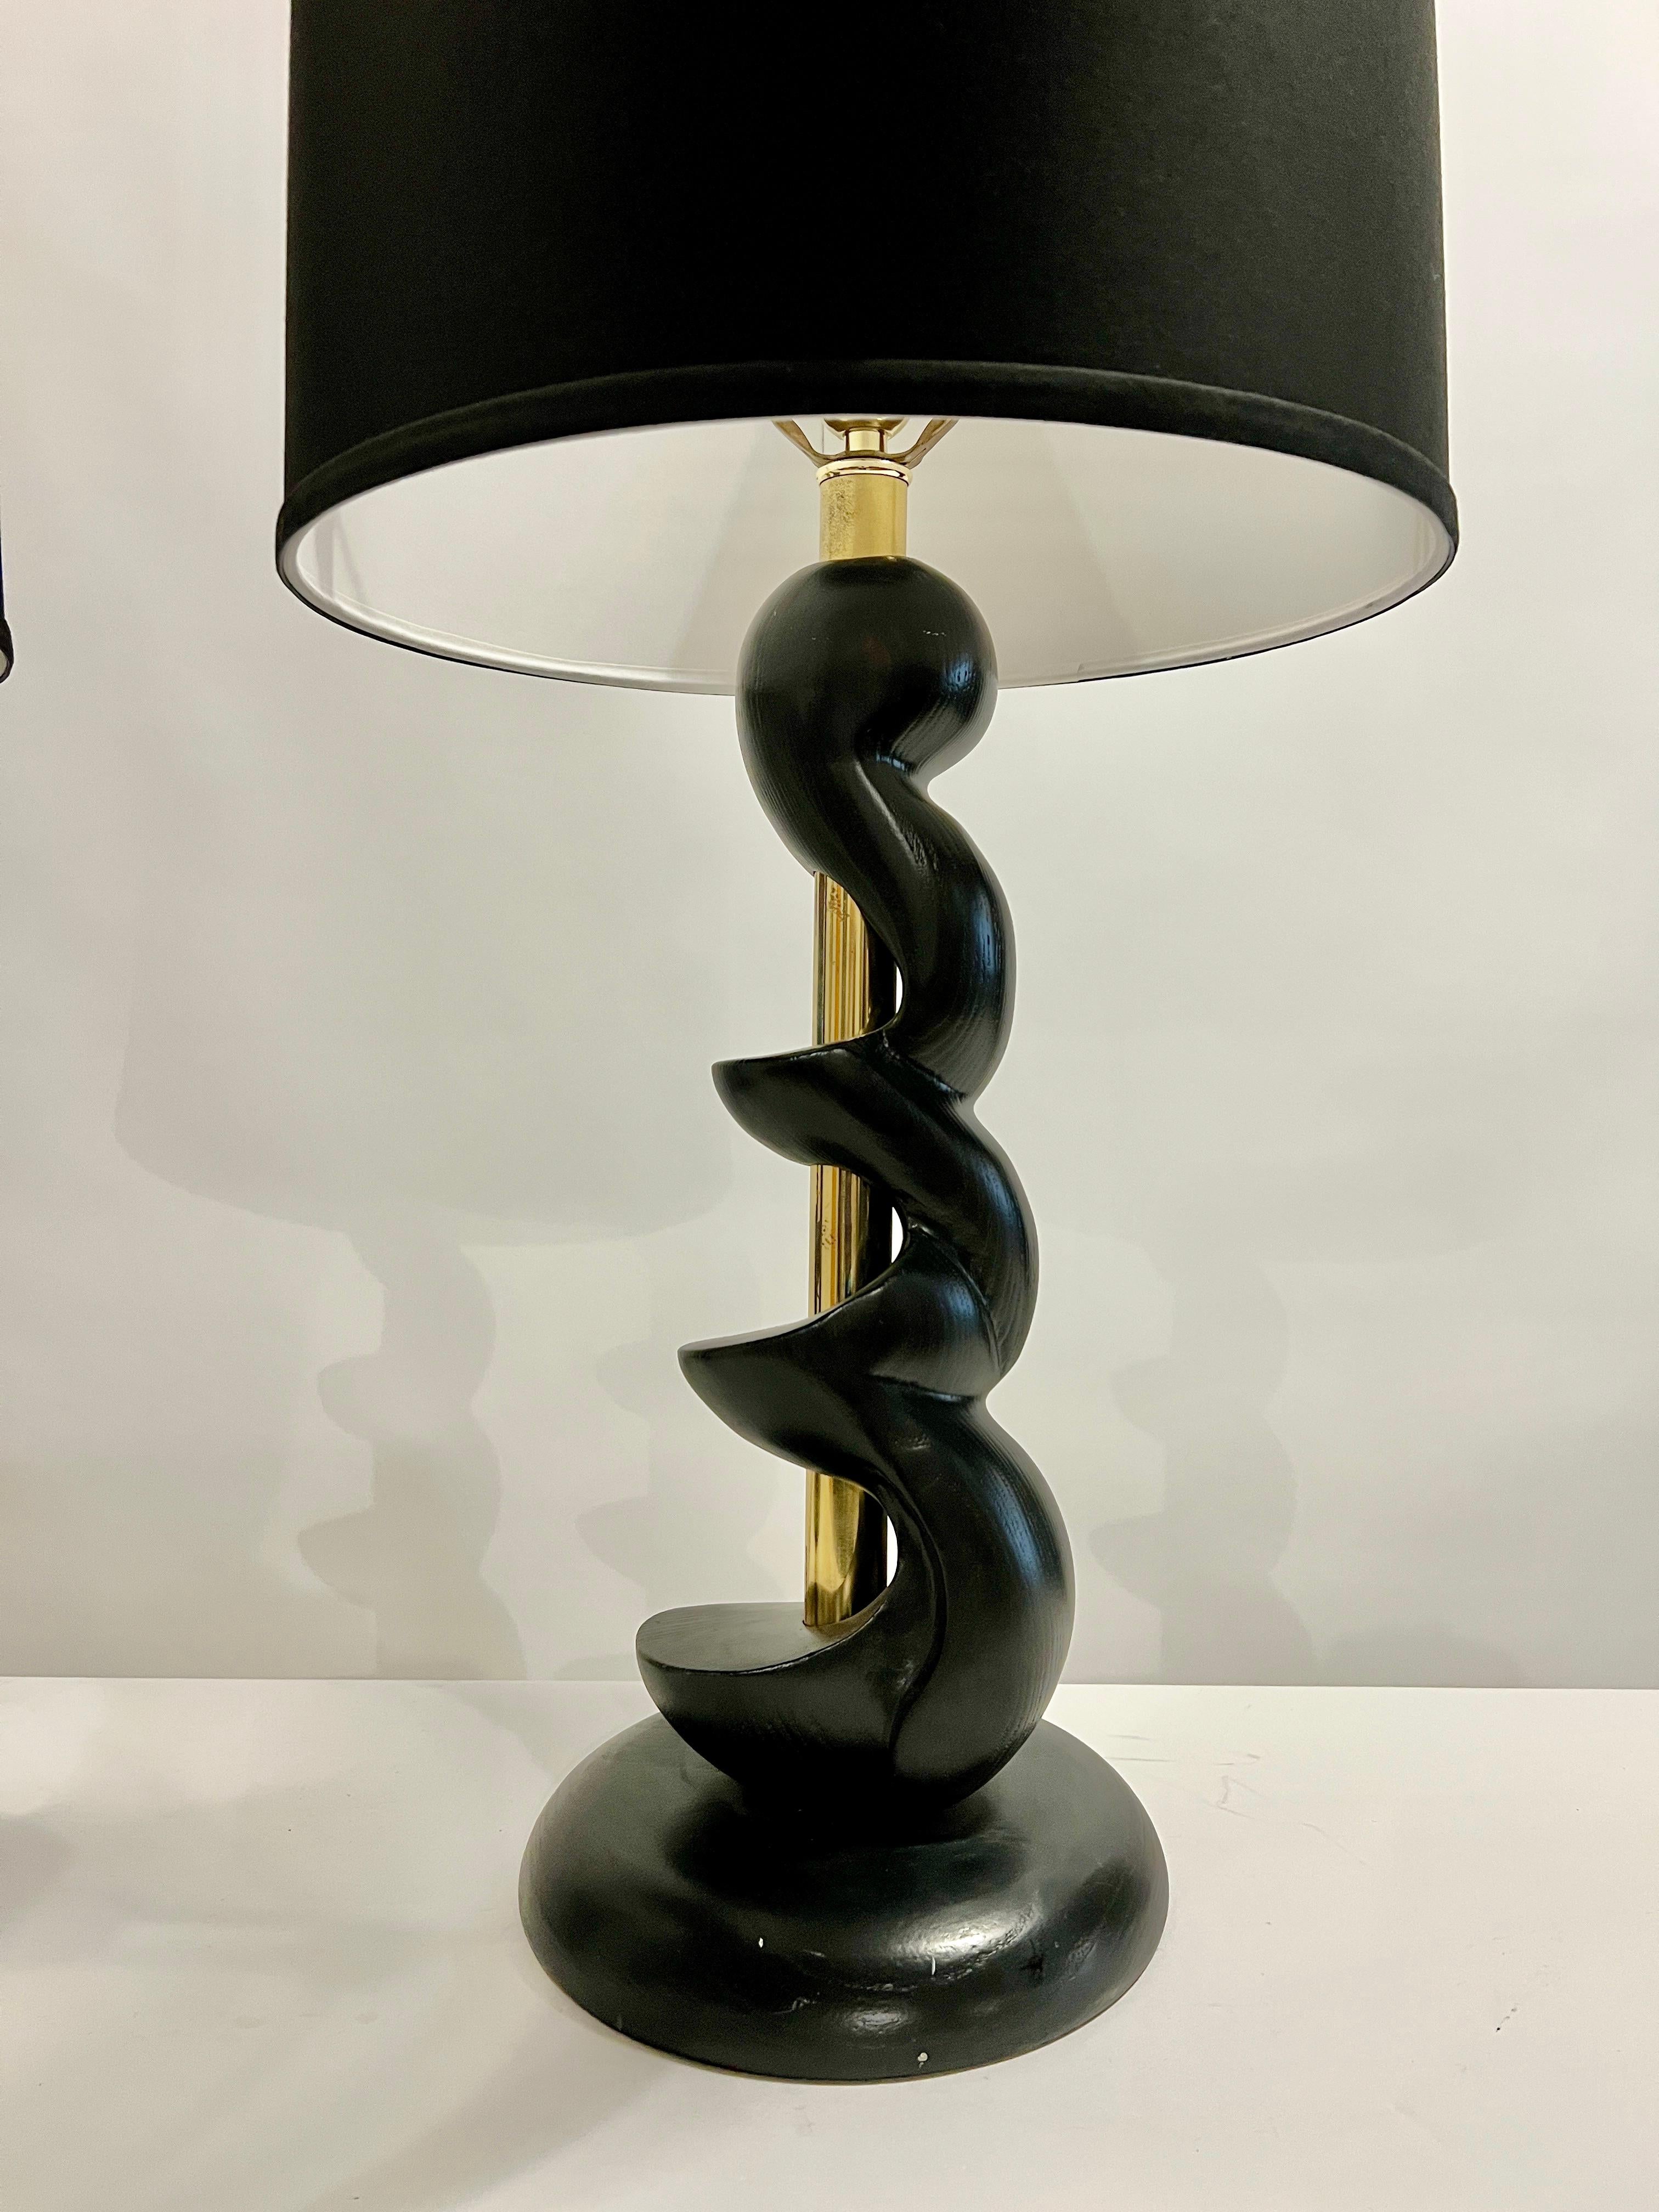 Elegant pair of spiral sculpted ebony wood lamps with brass accents. These vintage lamps were made by Light House Light and Shade Co., Los Angeles, Ca. in the 1960's and reinvented more recently in lacquered black. Lamps are in good working order. 